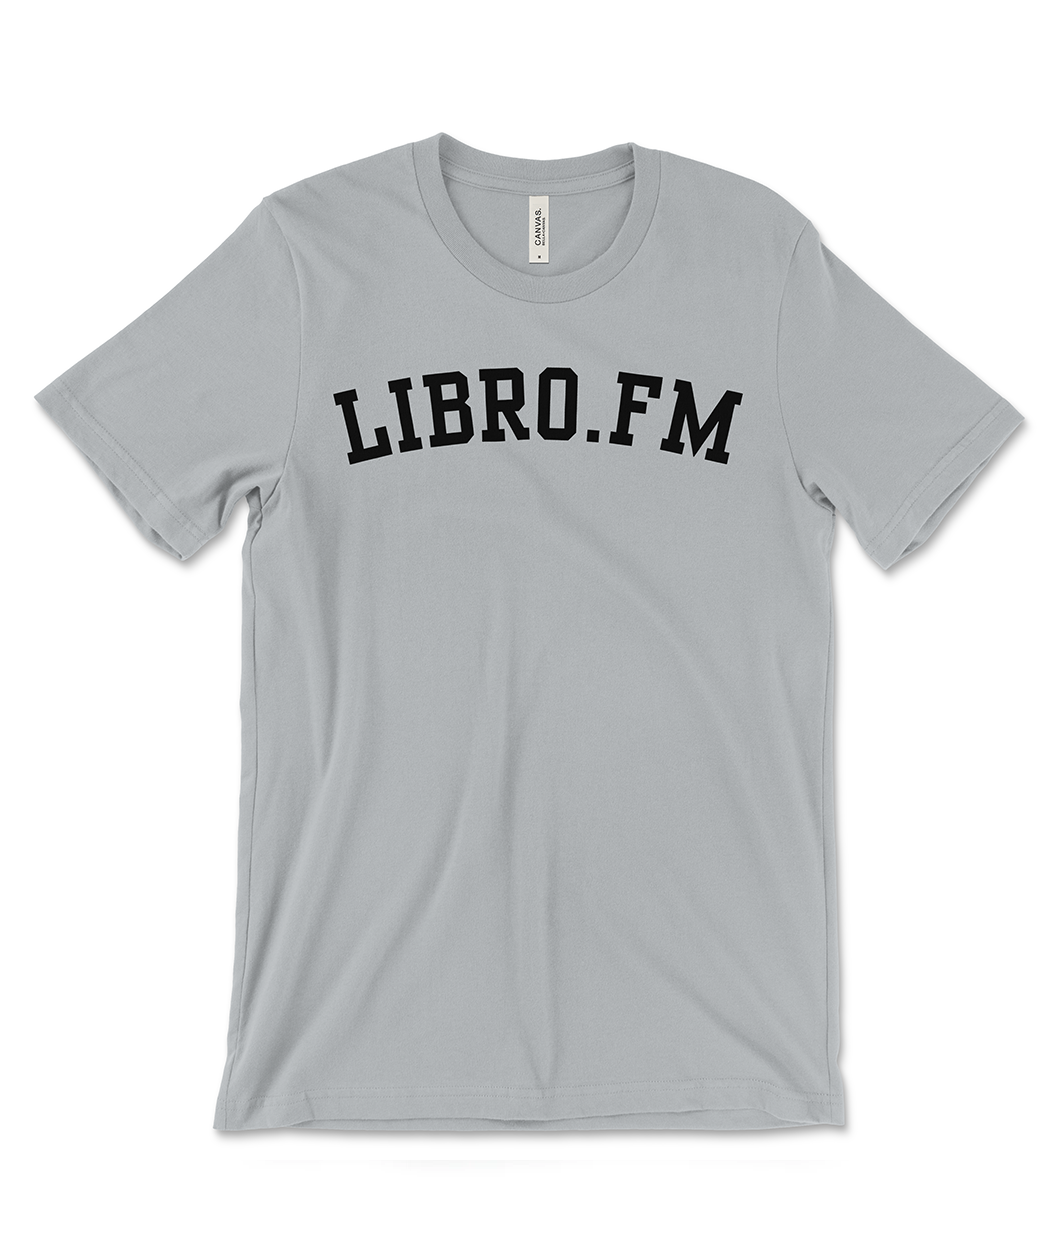 A silver shirt with "LIBRO.FM" written in black, block letters across the chest.